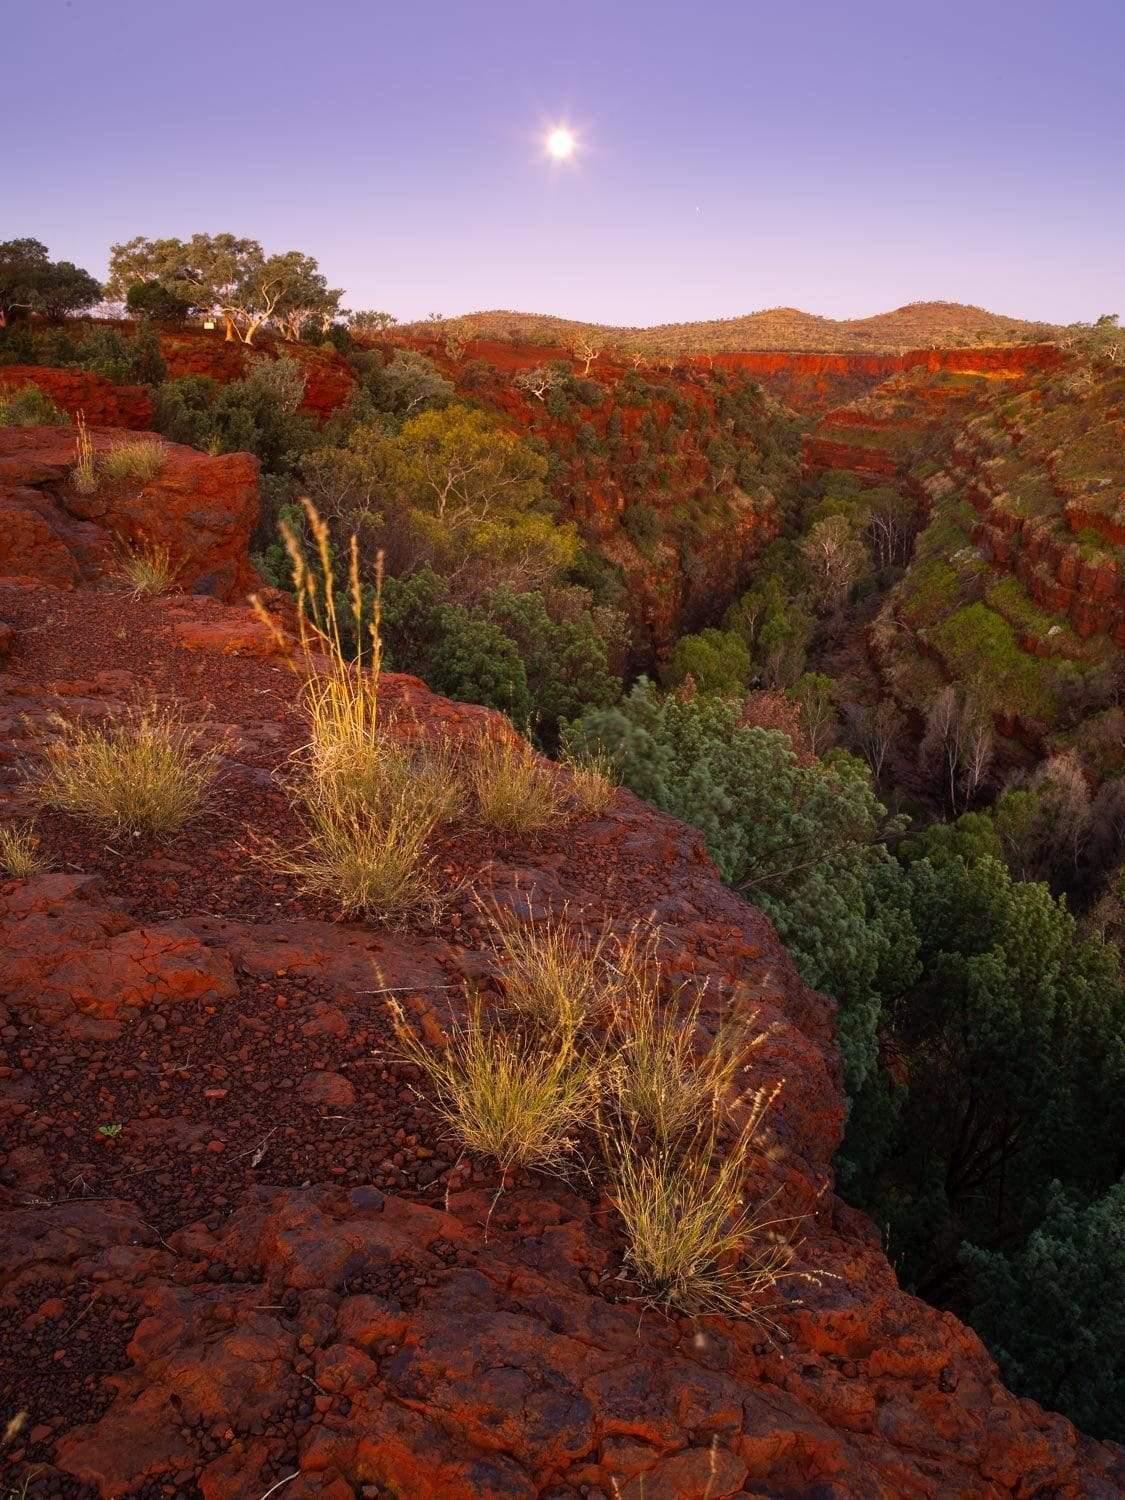 A Mars-like land area with a lot of trees and plants below, Standing sun with a low effect of sunlight, and a clear blue sky, Dales Moonrise - Karijini, The Pilbara